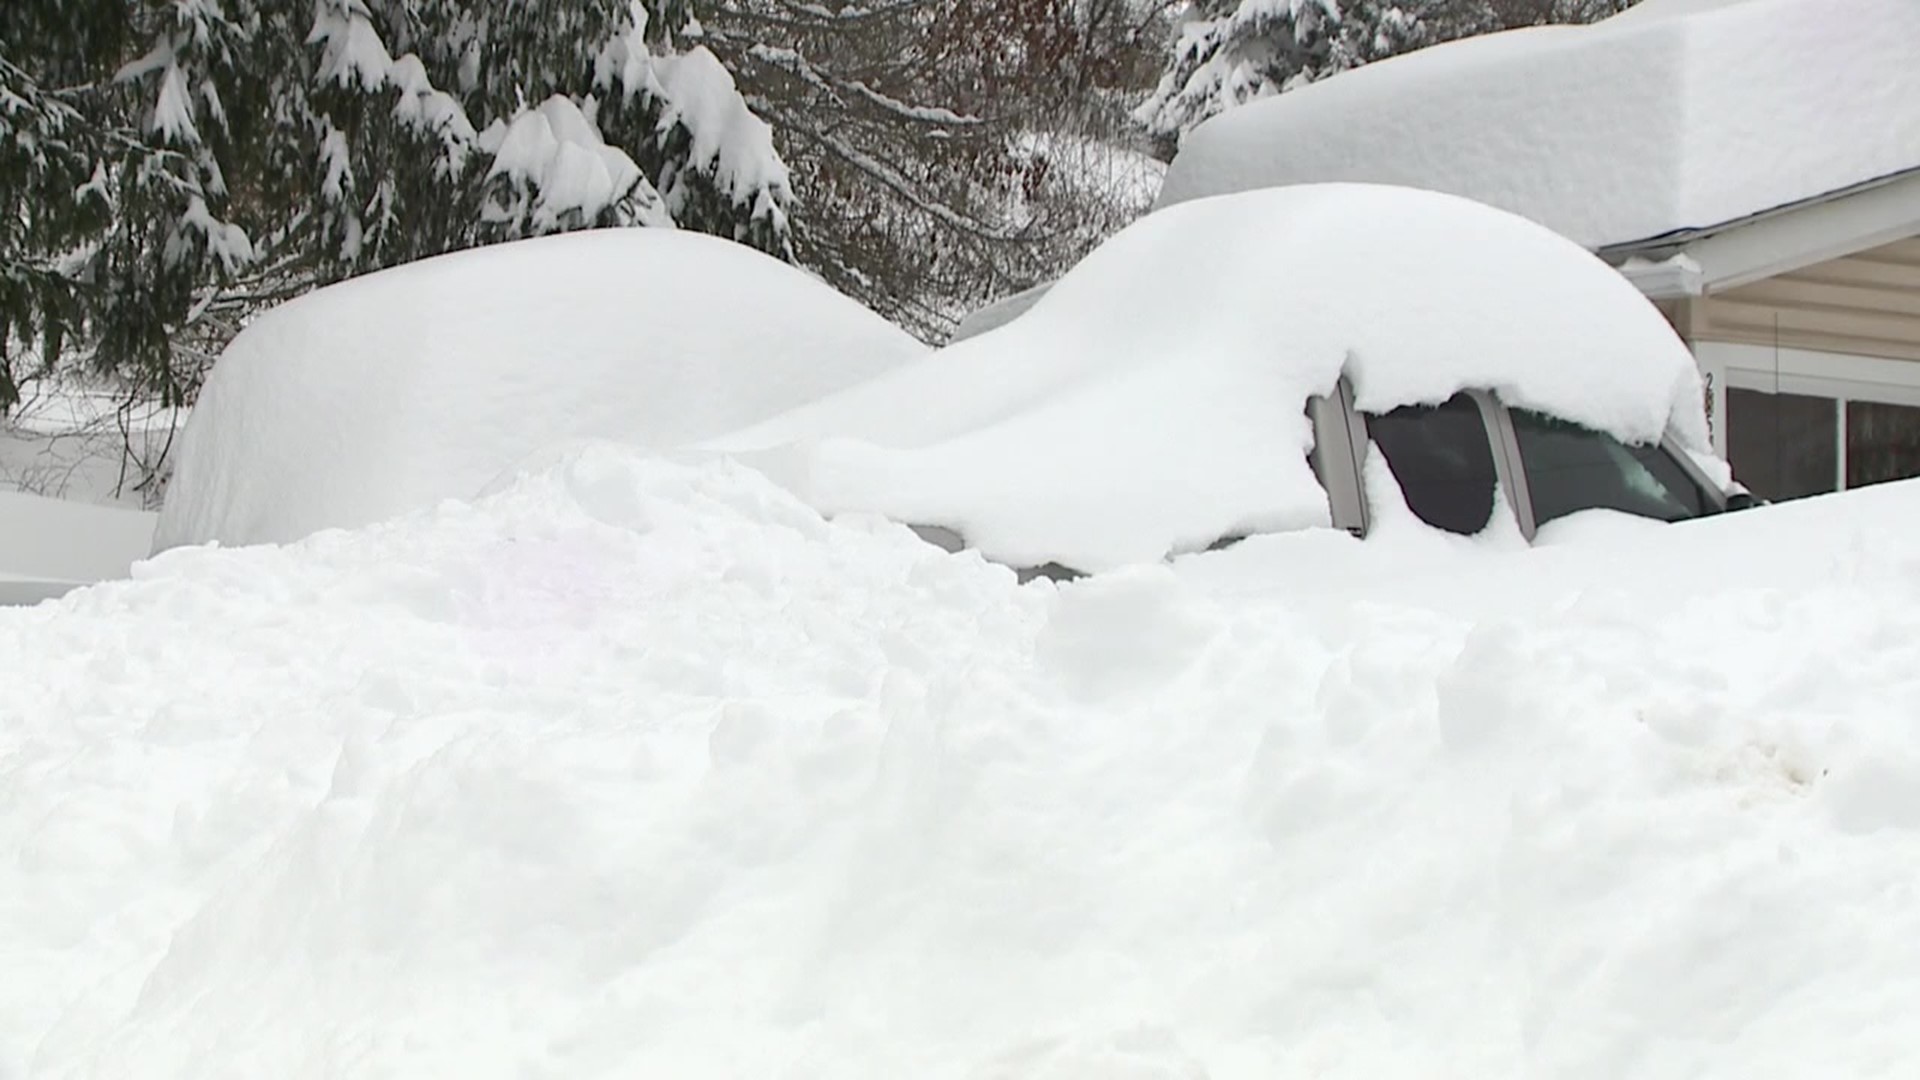 Residents told Newswatch 16 they've never seen such a heavy snowfall in their area.